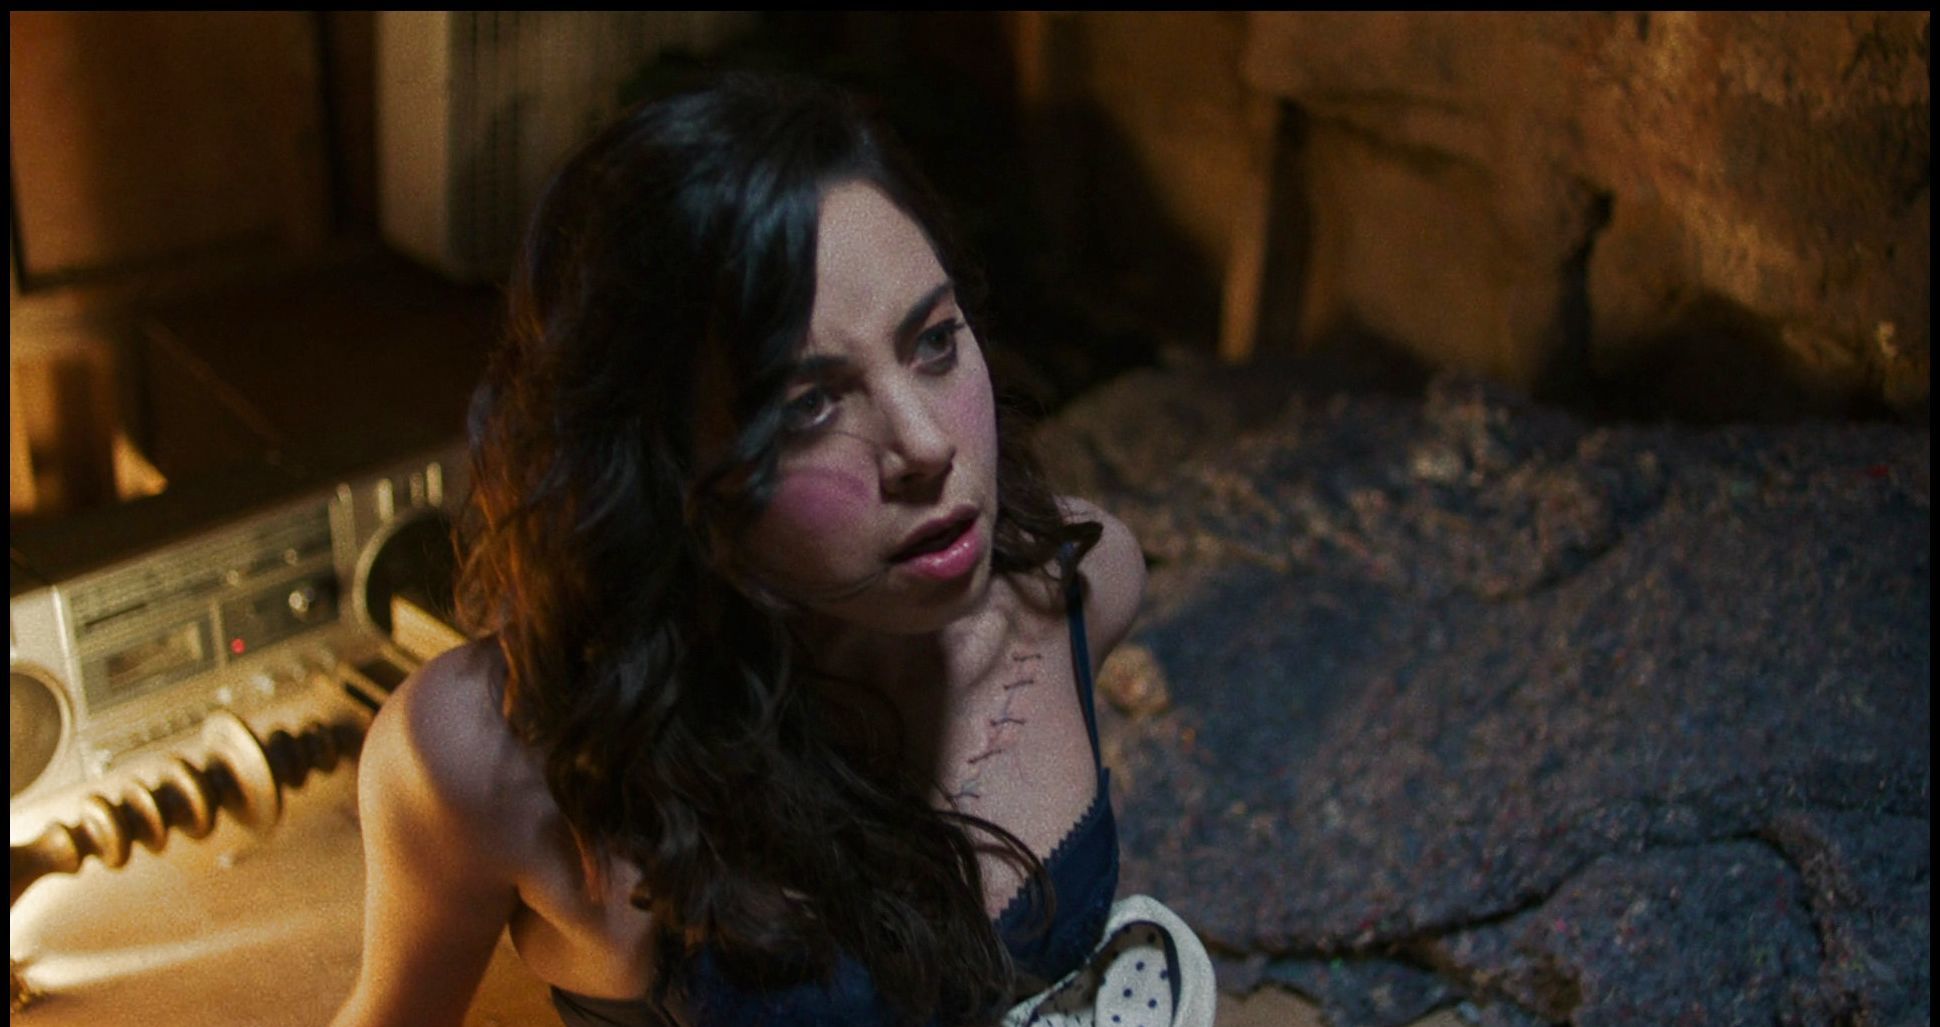 Life After Beth nude pics.